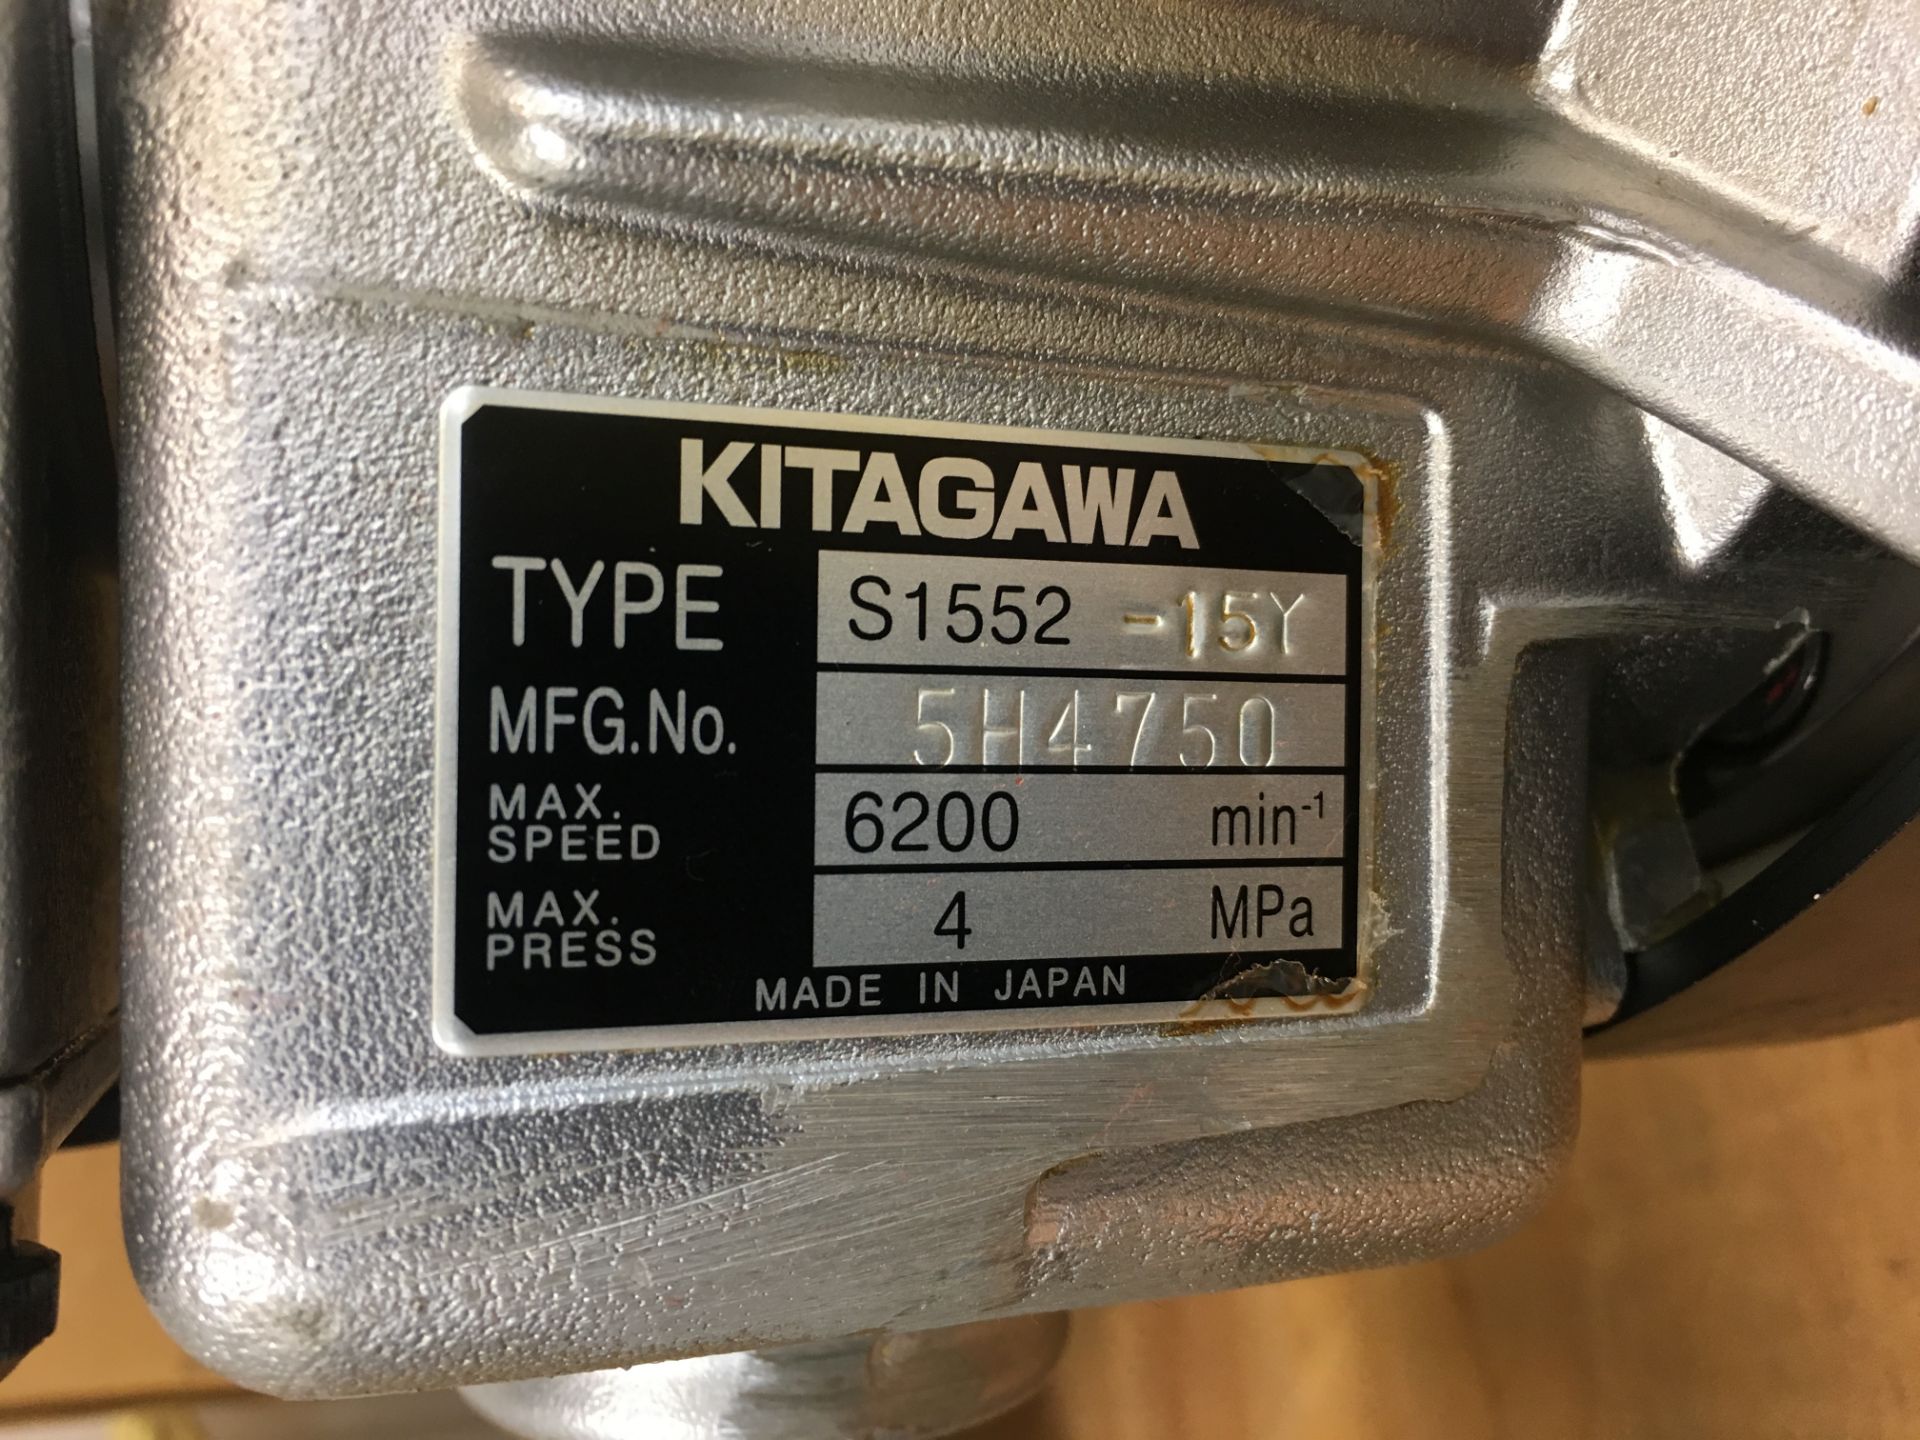 KITAGAWA #S1552-15Y HOLLOW SPINDLE HYDRAULIC ROTARY SPINDLE CHUCK ACTUATOR (NEW) - Image 2 of 2